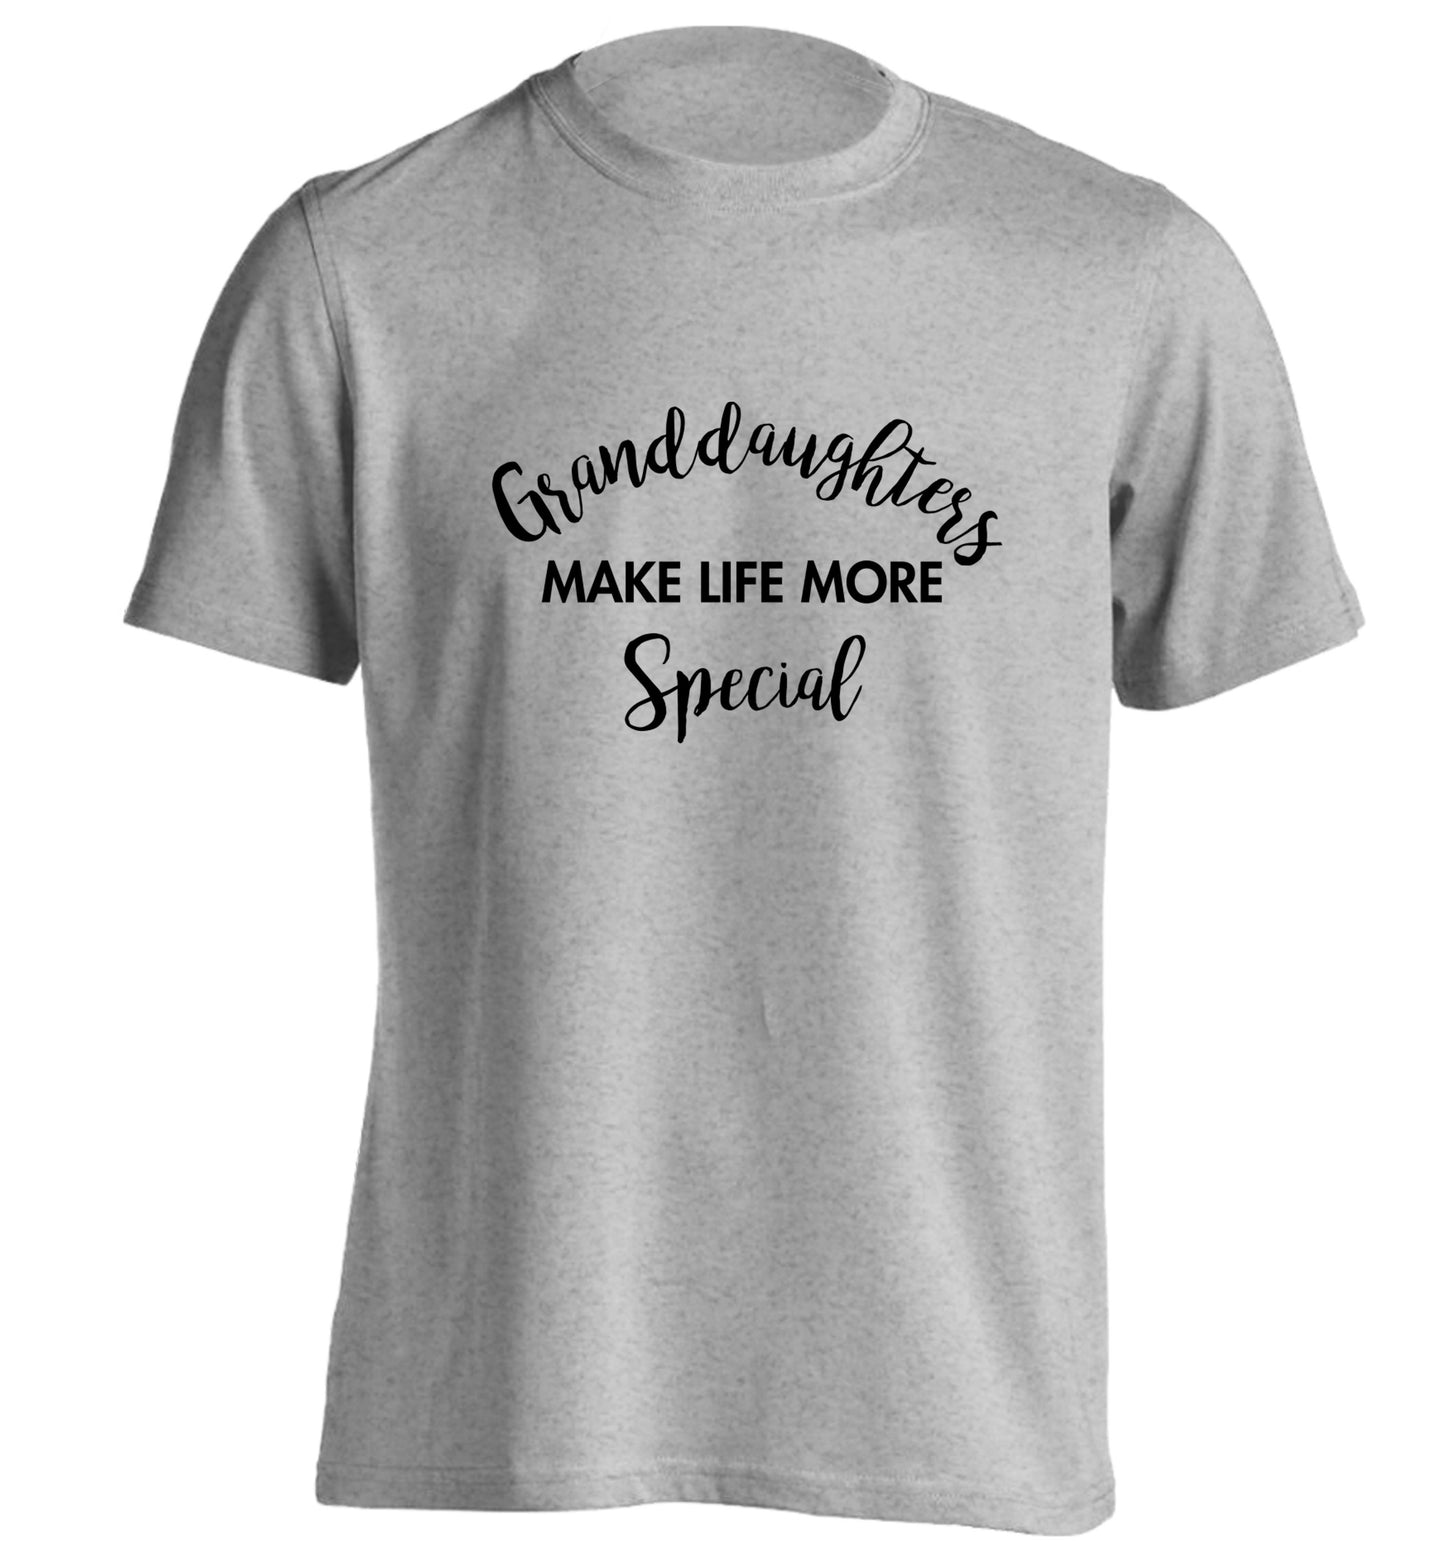 Granddaughters make life more special adults unisex grey Tshirt 2XL